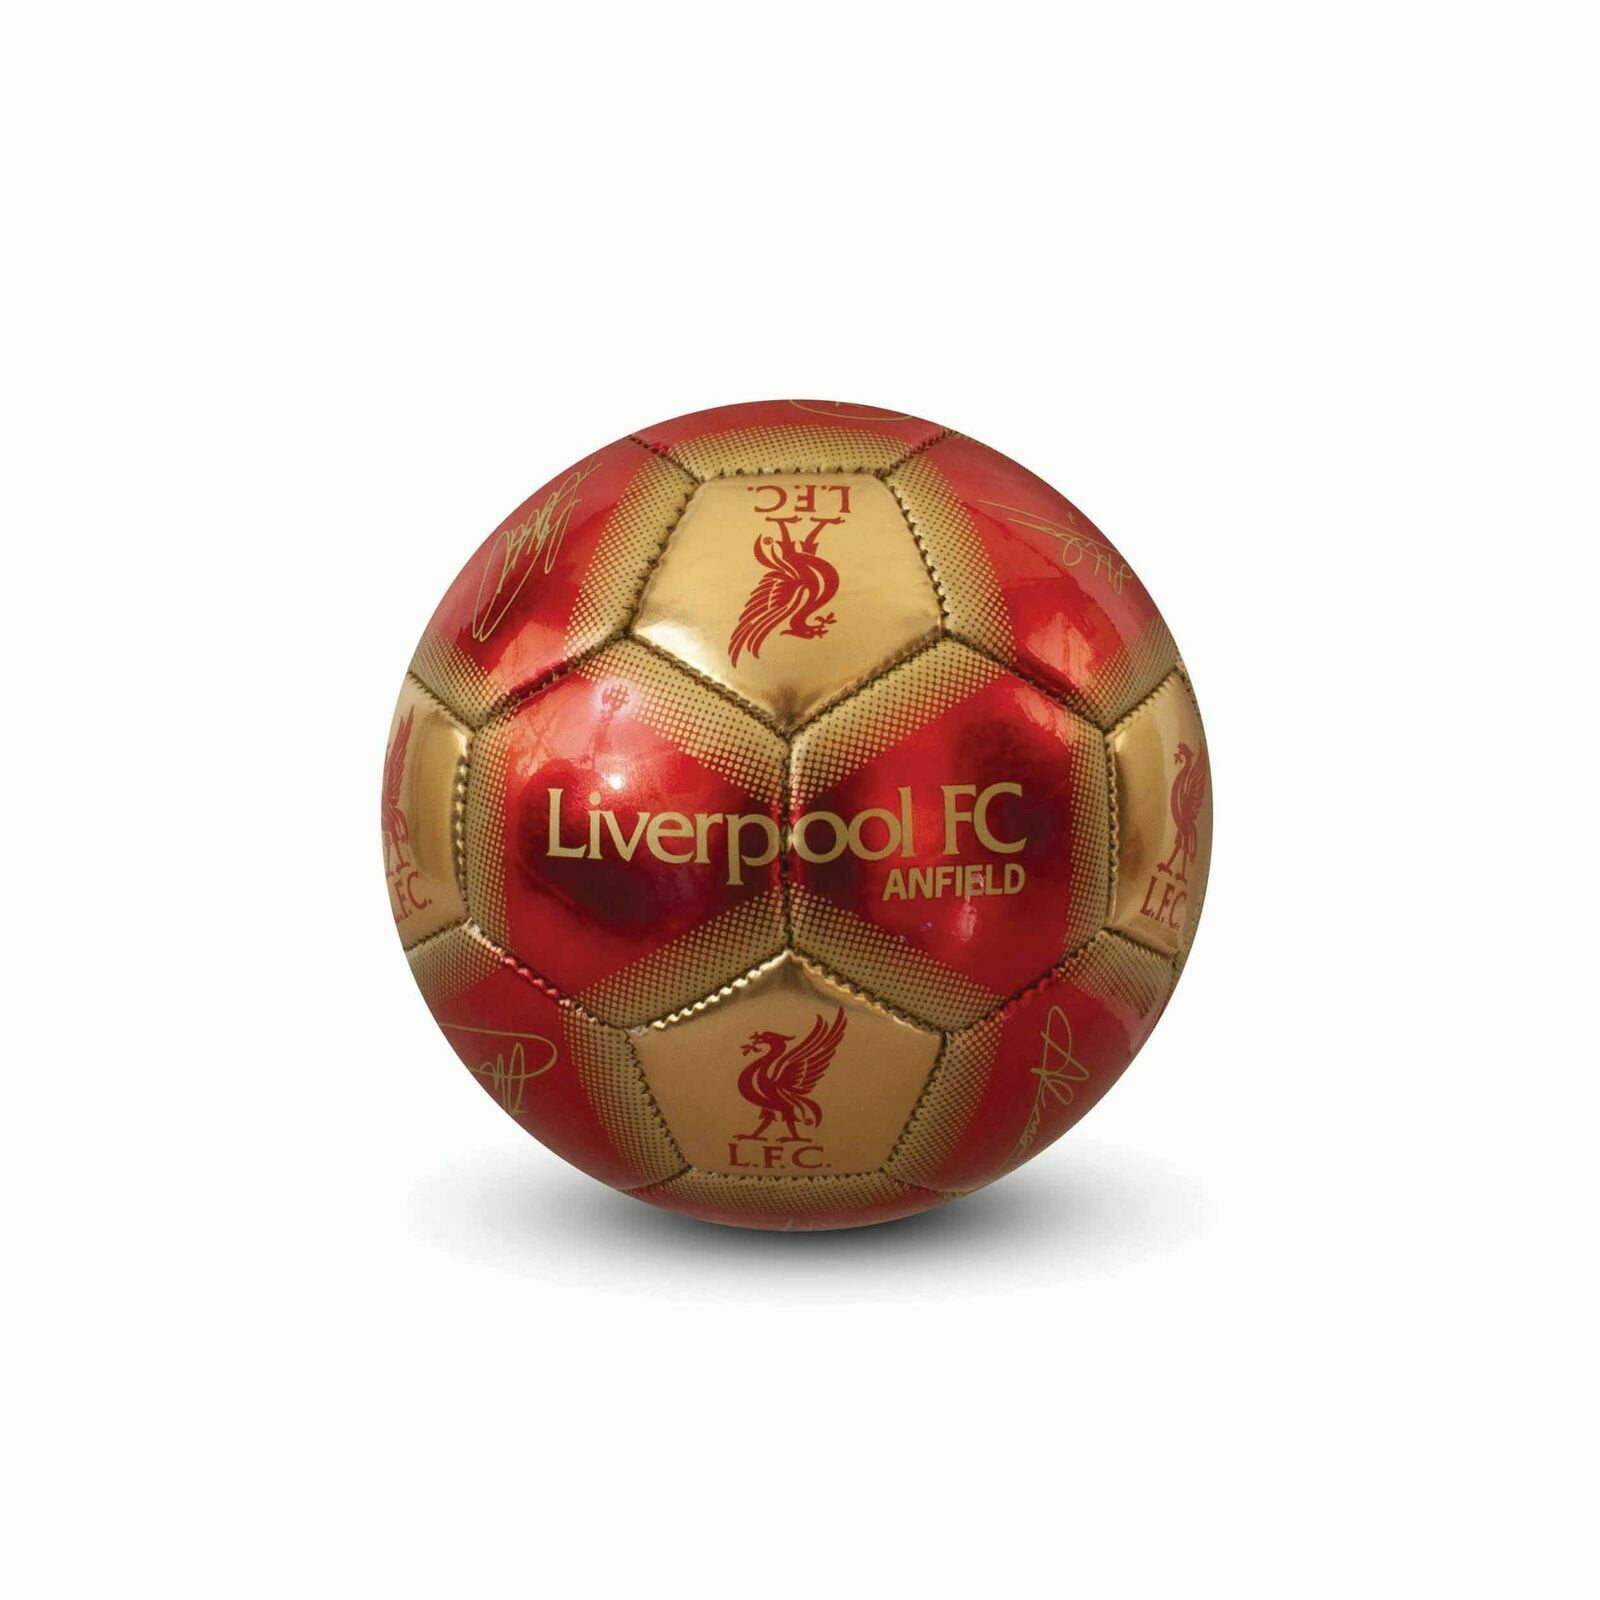 Liverpool FC Diamond Mini Leather Soccer Ball Size 1 White/Red 